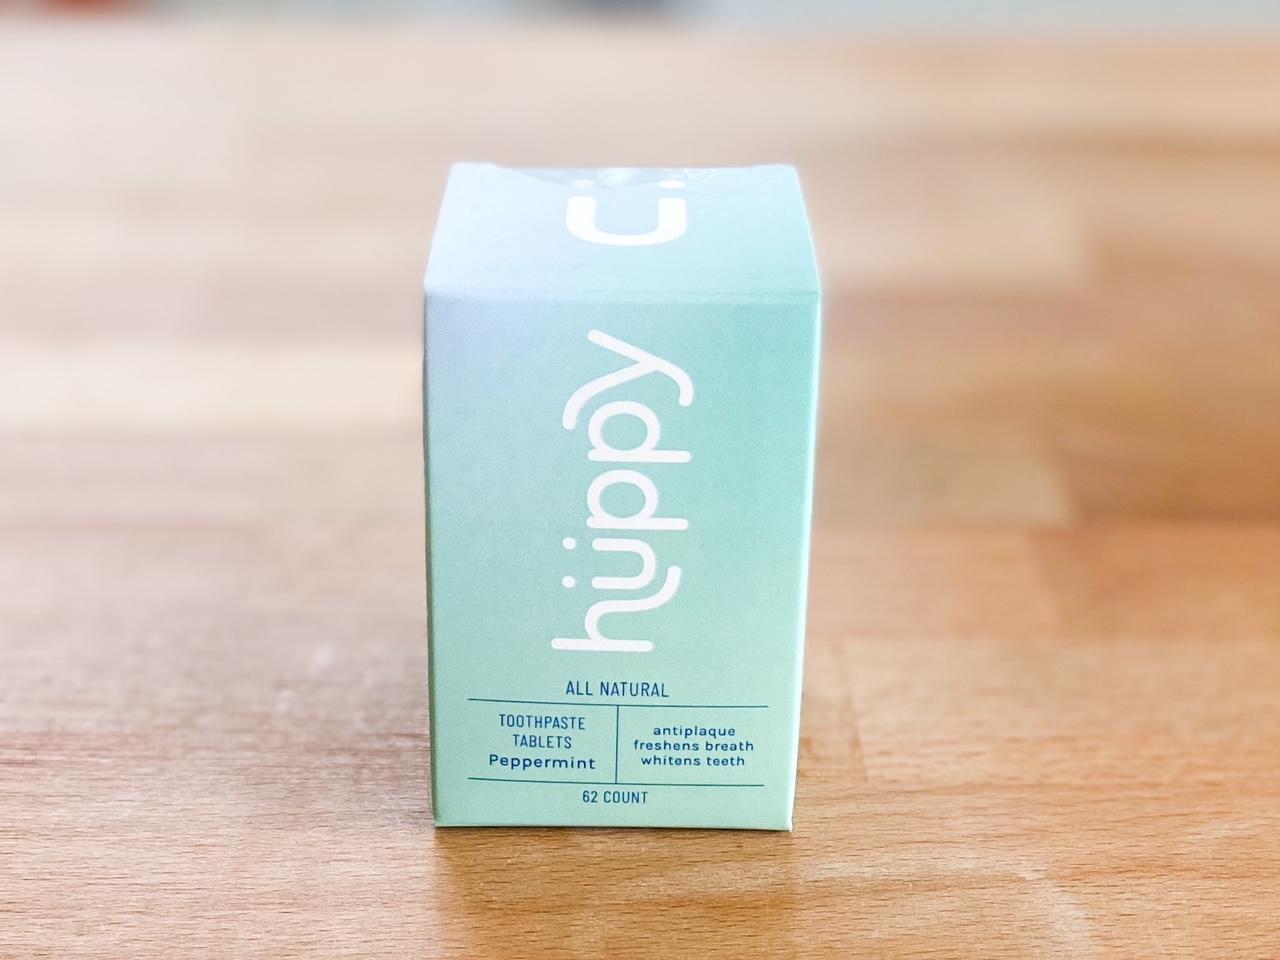 Toothpaste Tablets by Huppy (Flouride Alternative) - Refillable